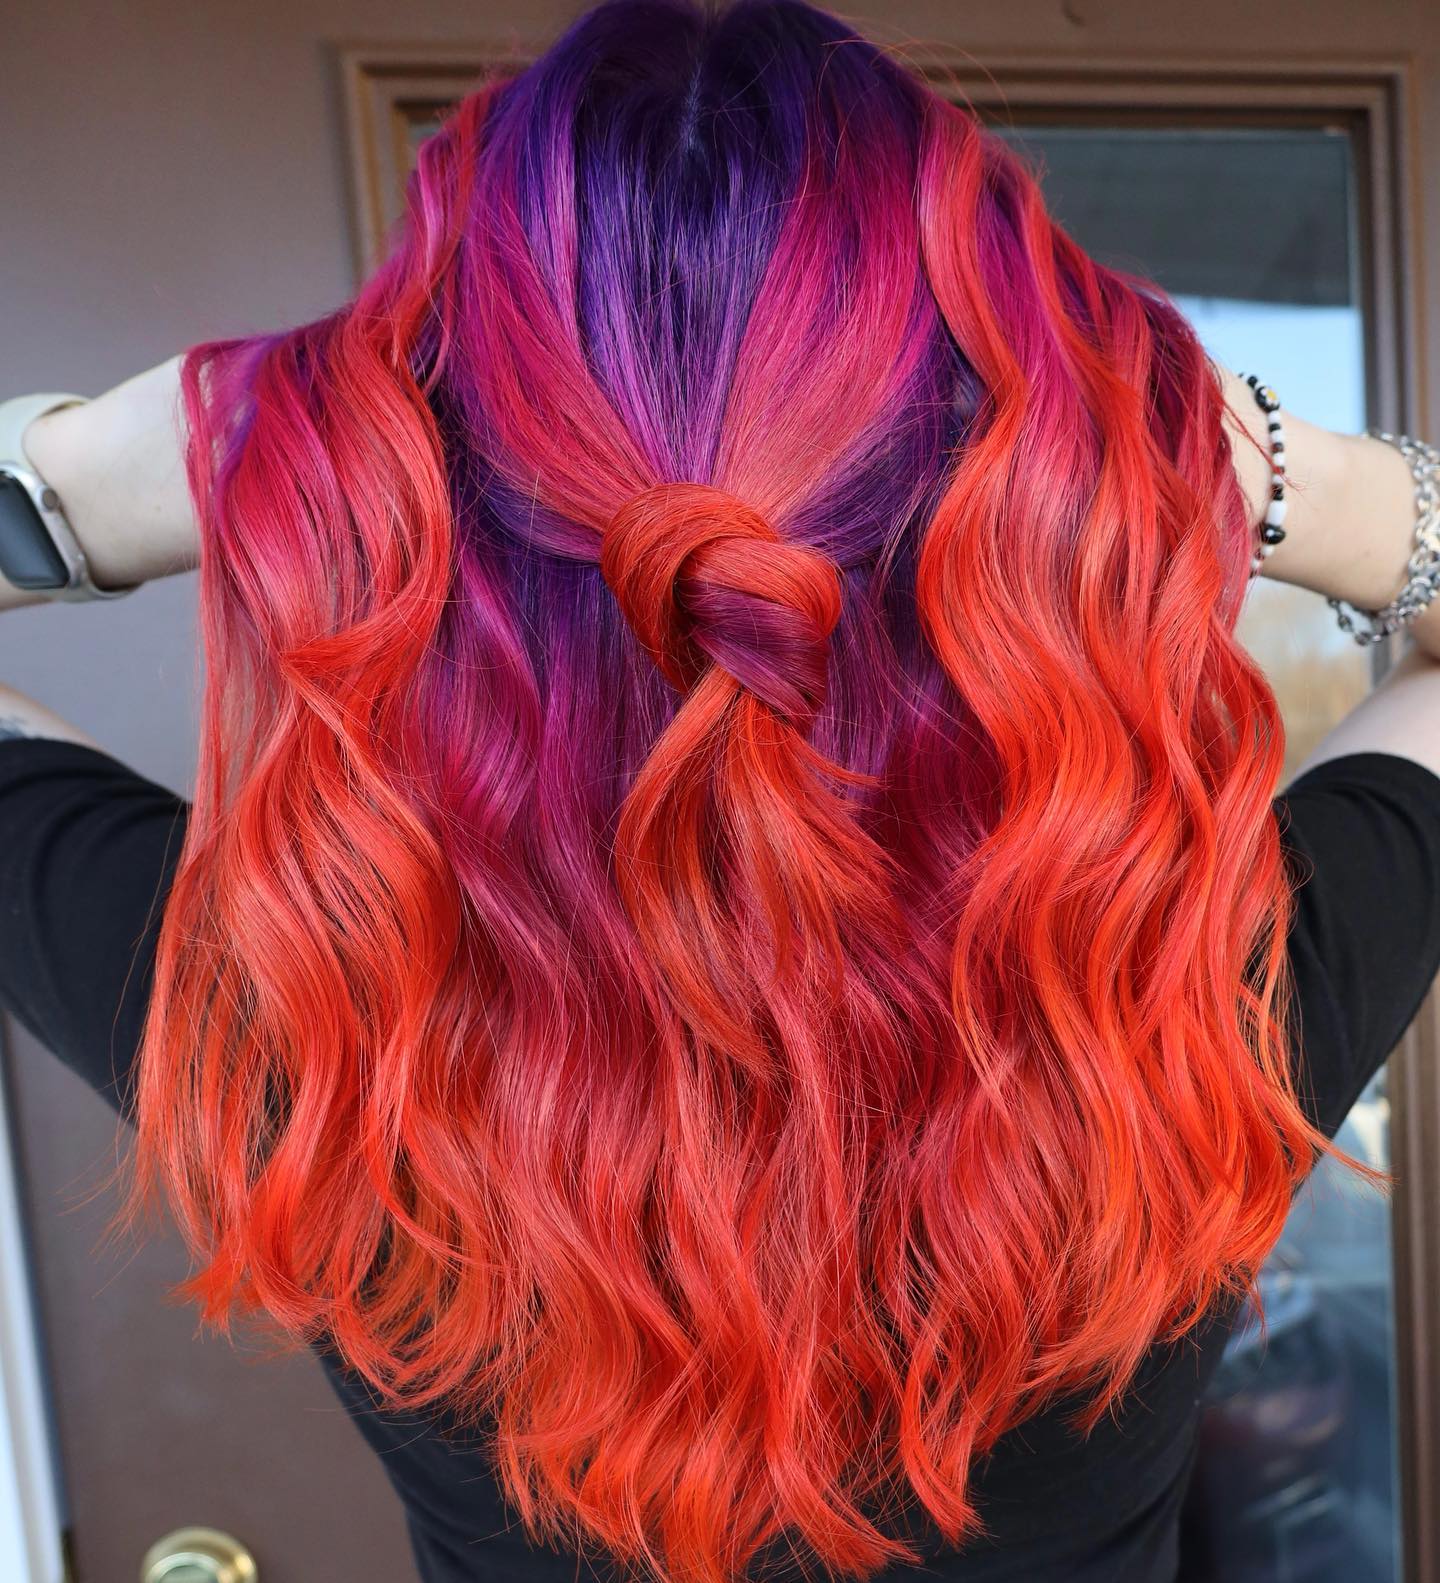 Violet & Red Ombre Hair Combo